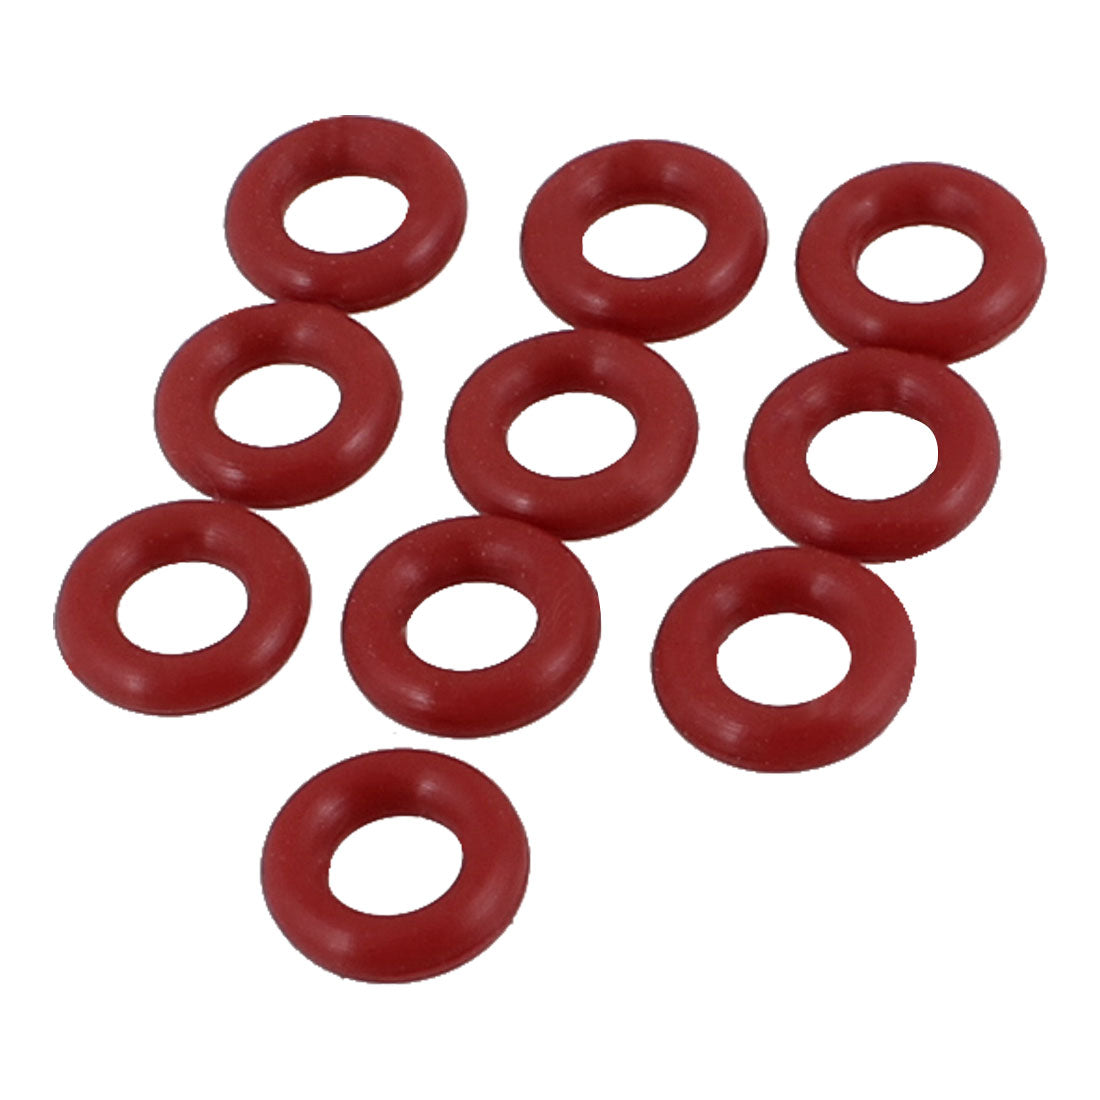 uxcell Uxcell 10 Pcs 8mm x 2mm Rubber O-ring Oil Seal Sealing Ring Gaskets Red